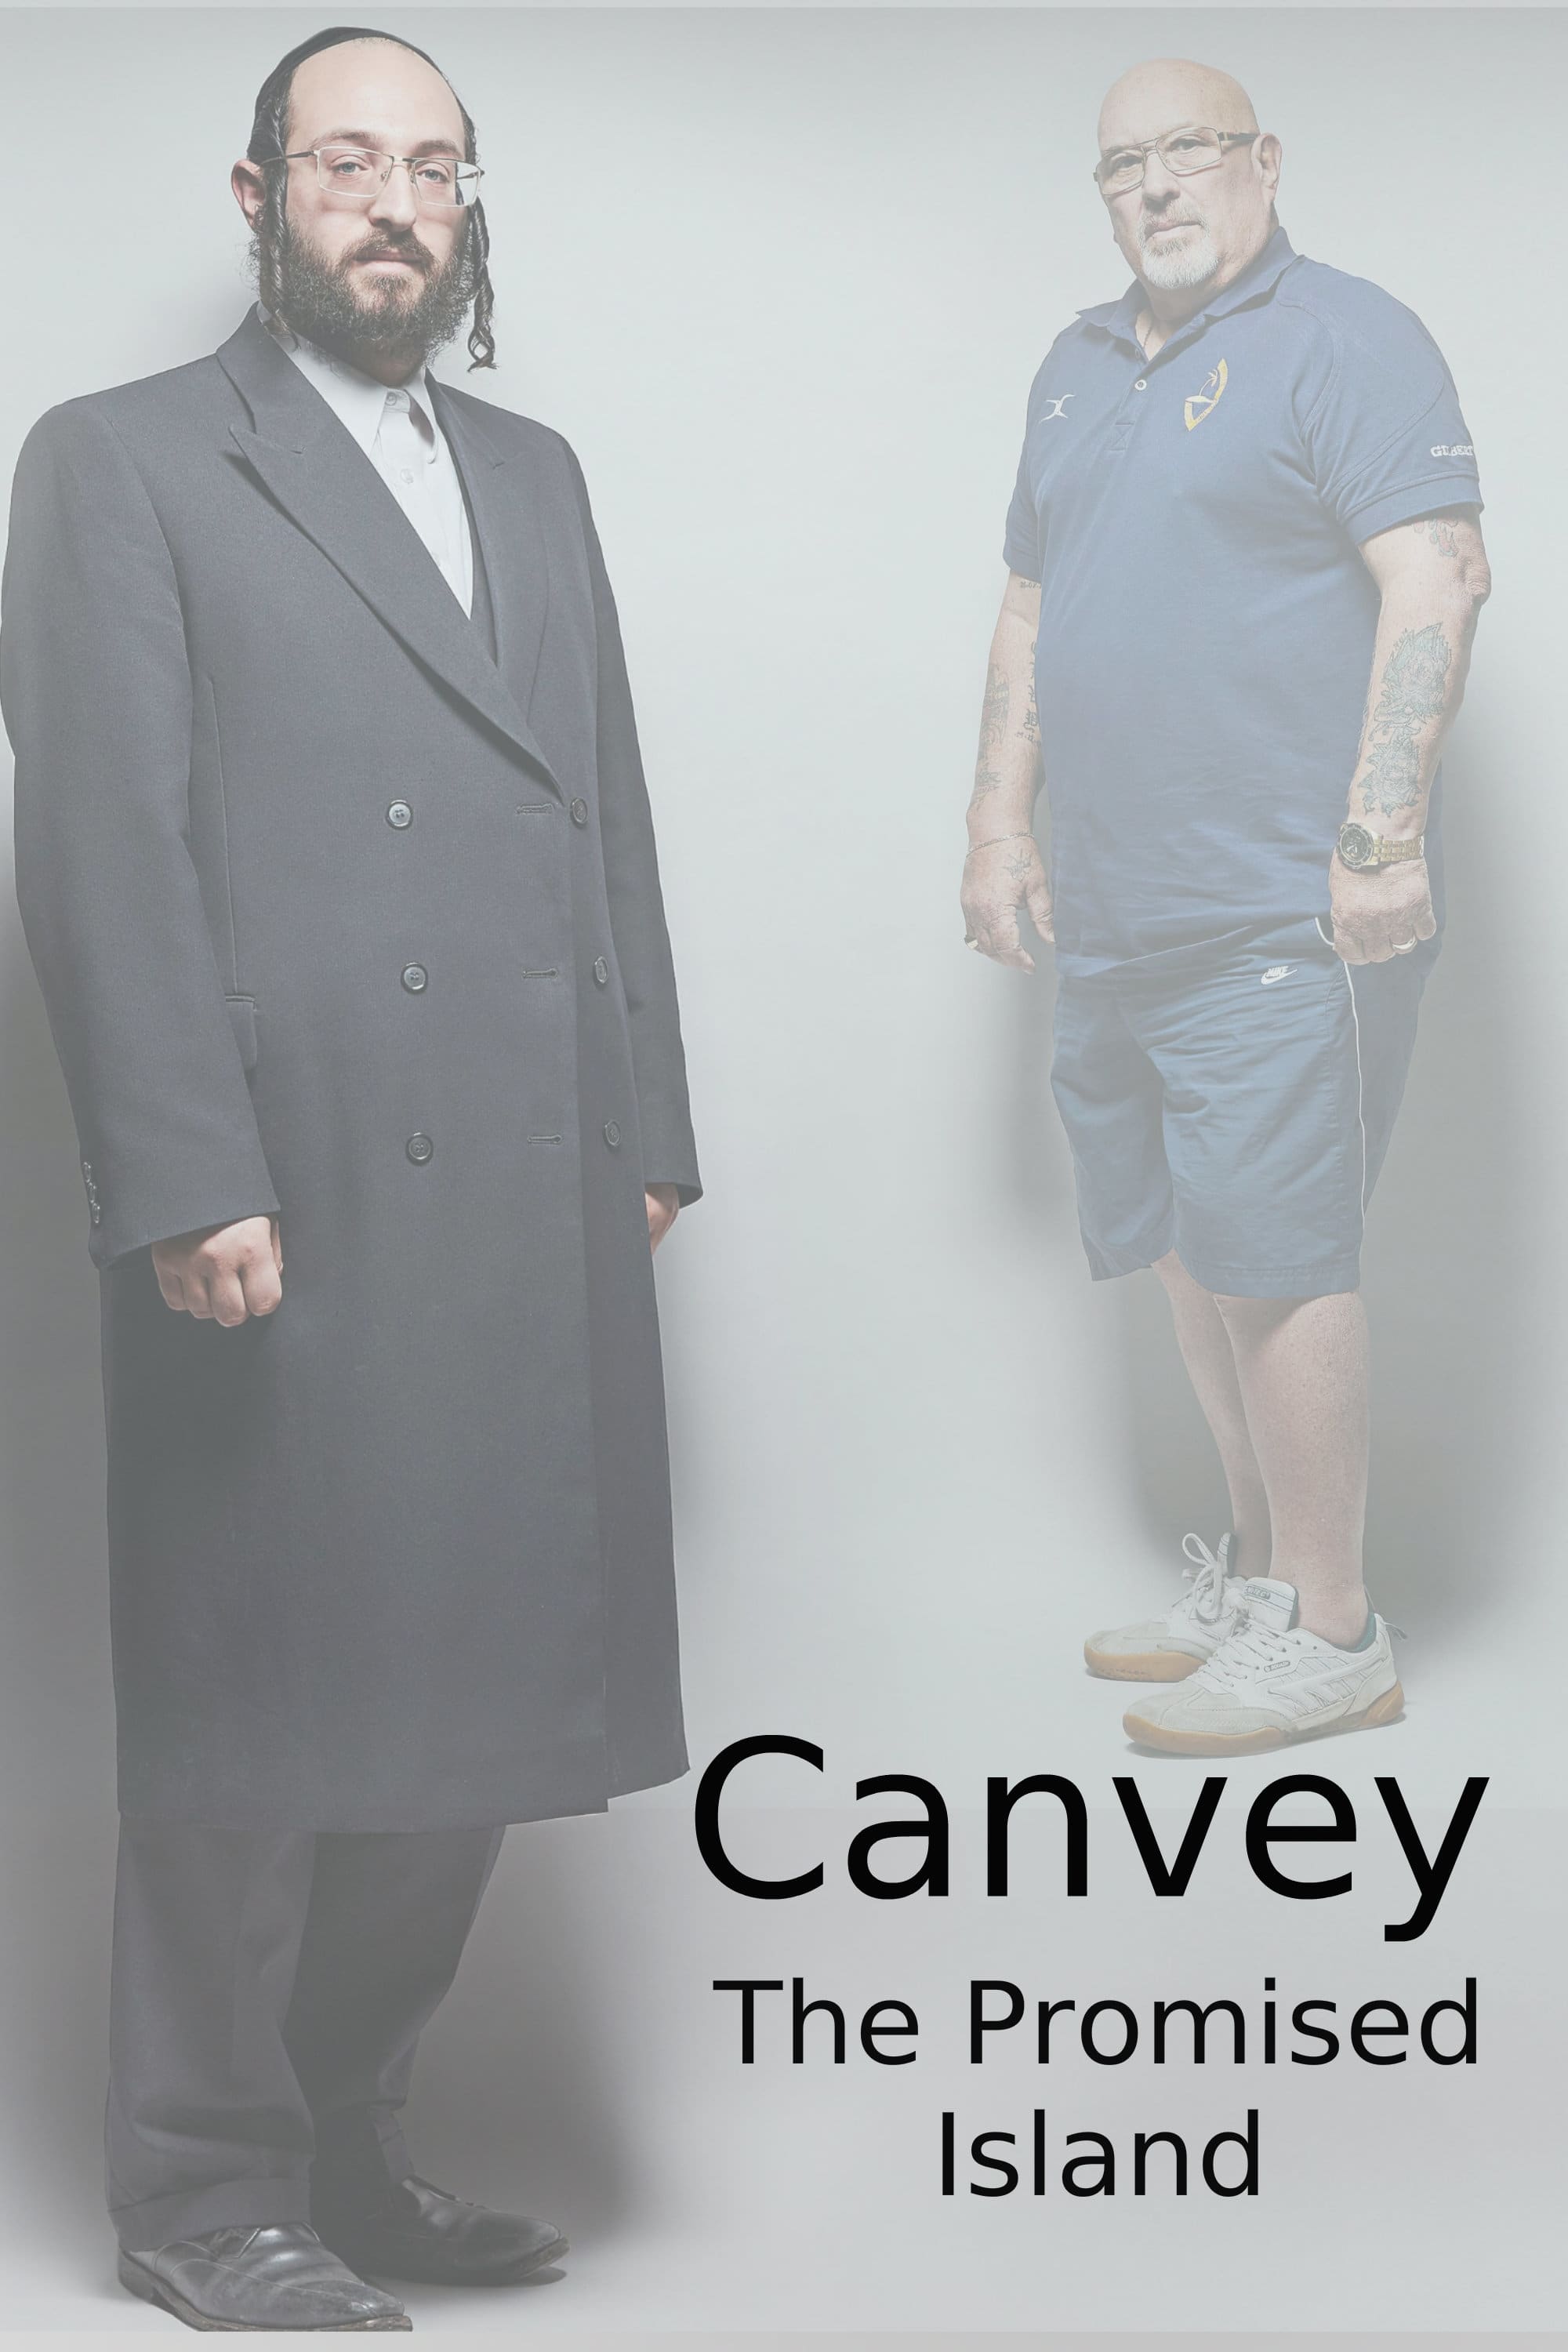 Canvey - The Promised Island